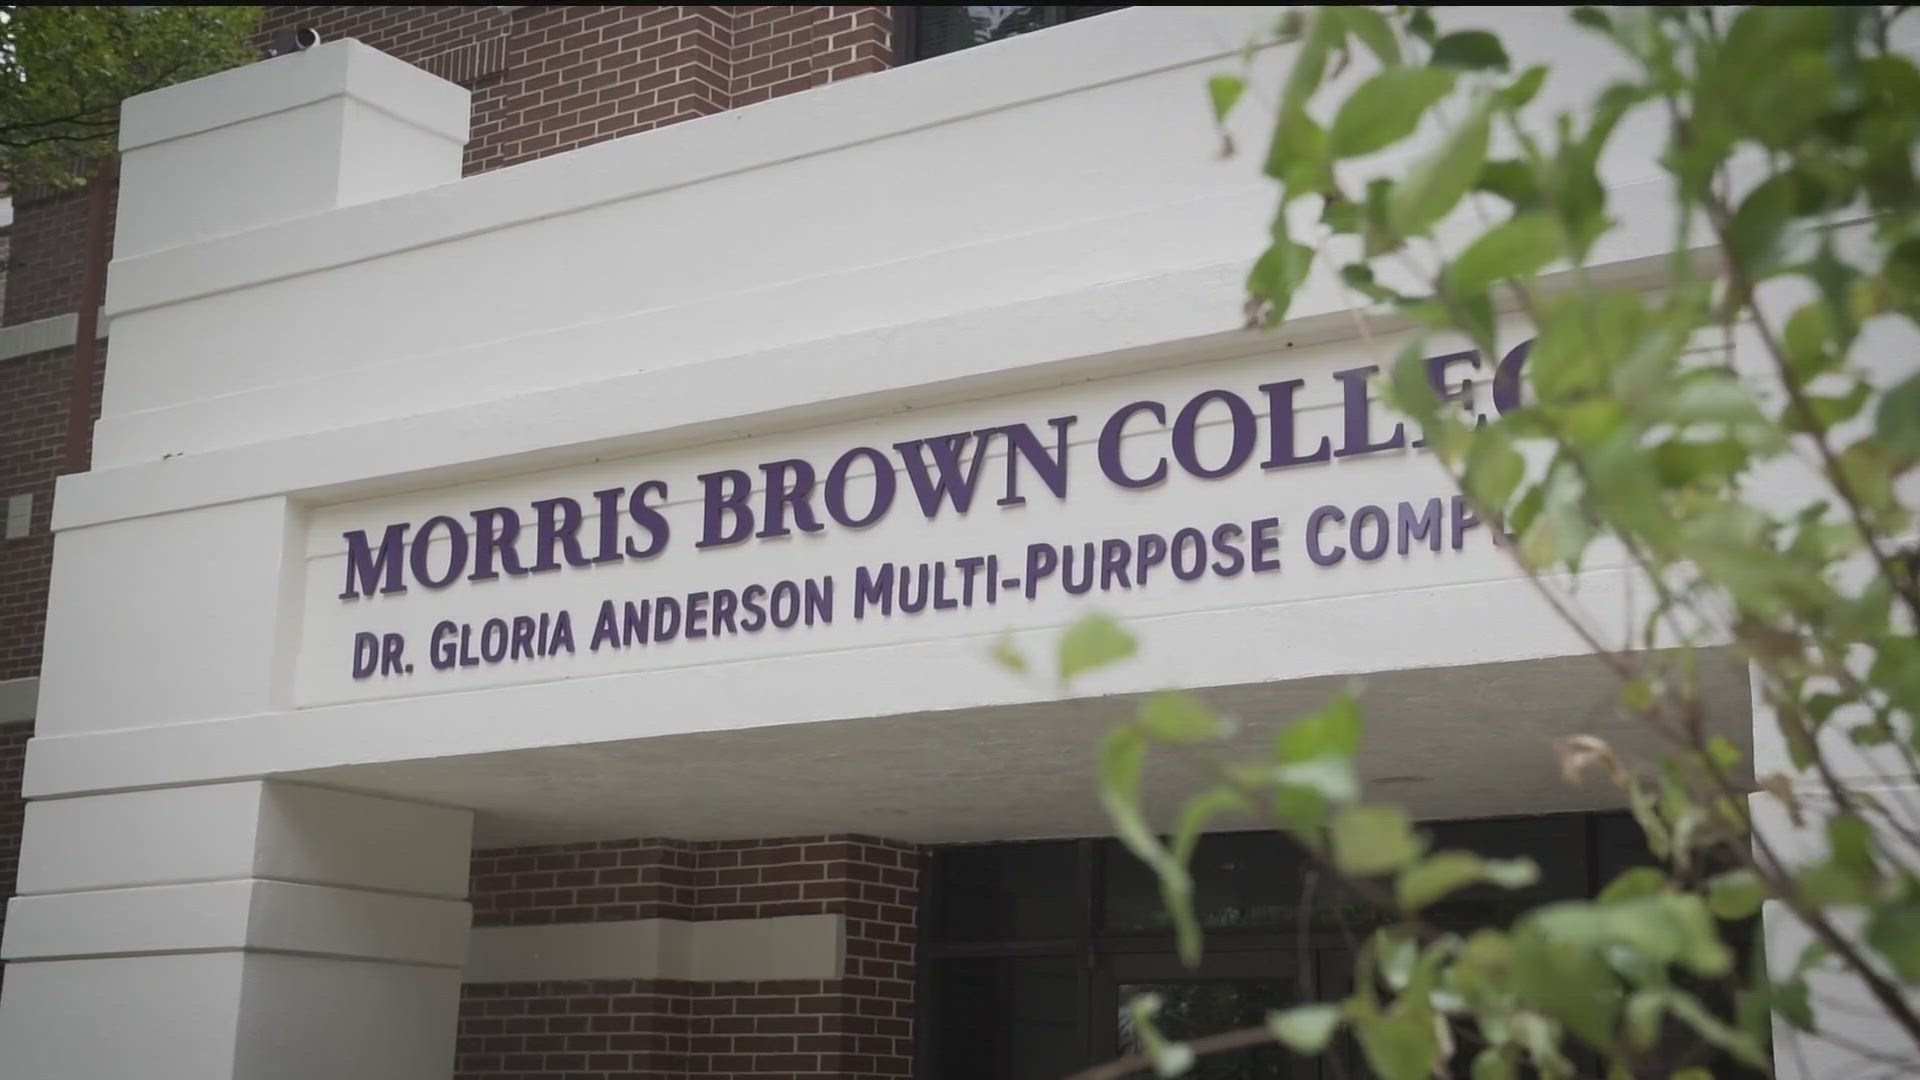 Morris Brown College looks to digitize hospitality program for rural students with $3 million grant